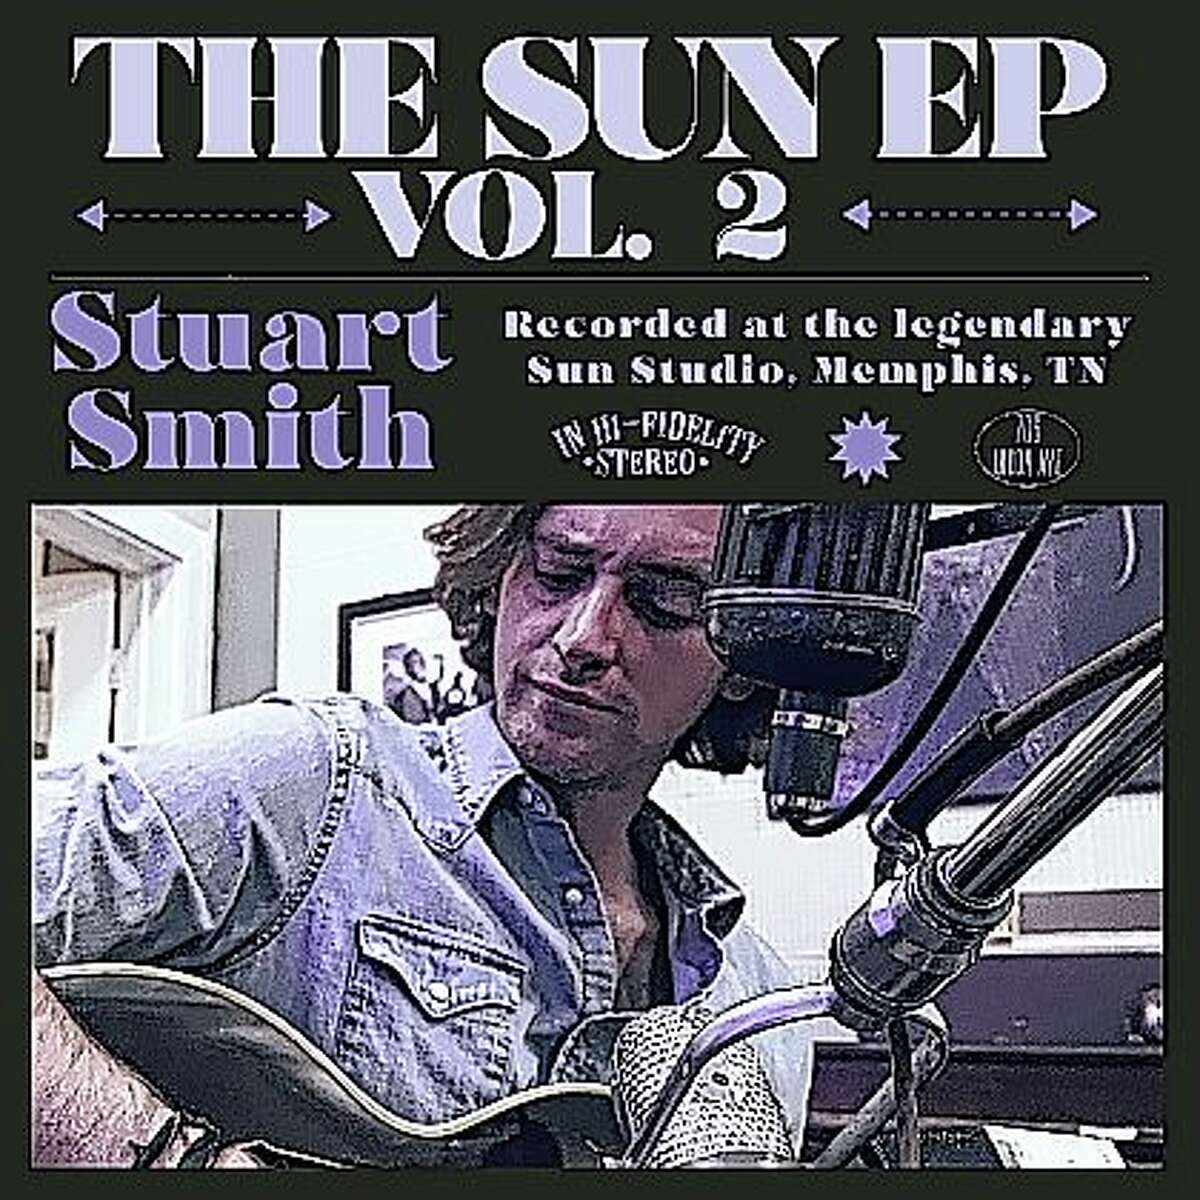 Stuart Smith’s latest release, “The Sun EP Vol. 2,” follows on the heels of “The Sun EP,” which features tracks recorded at Sun Studio in Memphis, Tennessee. 